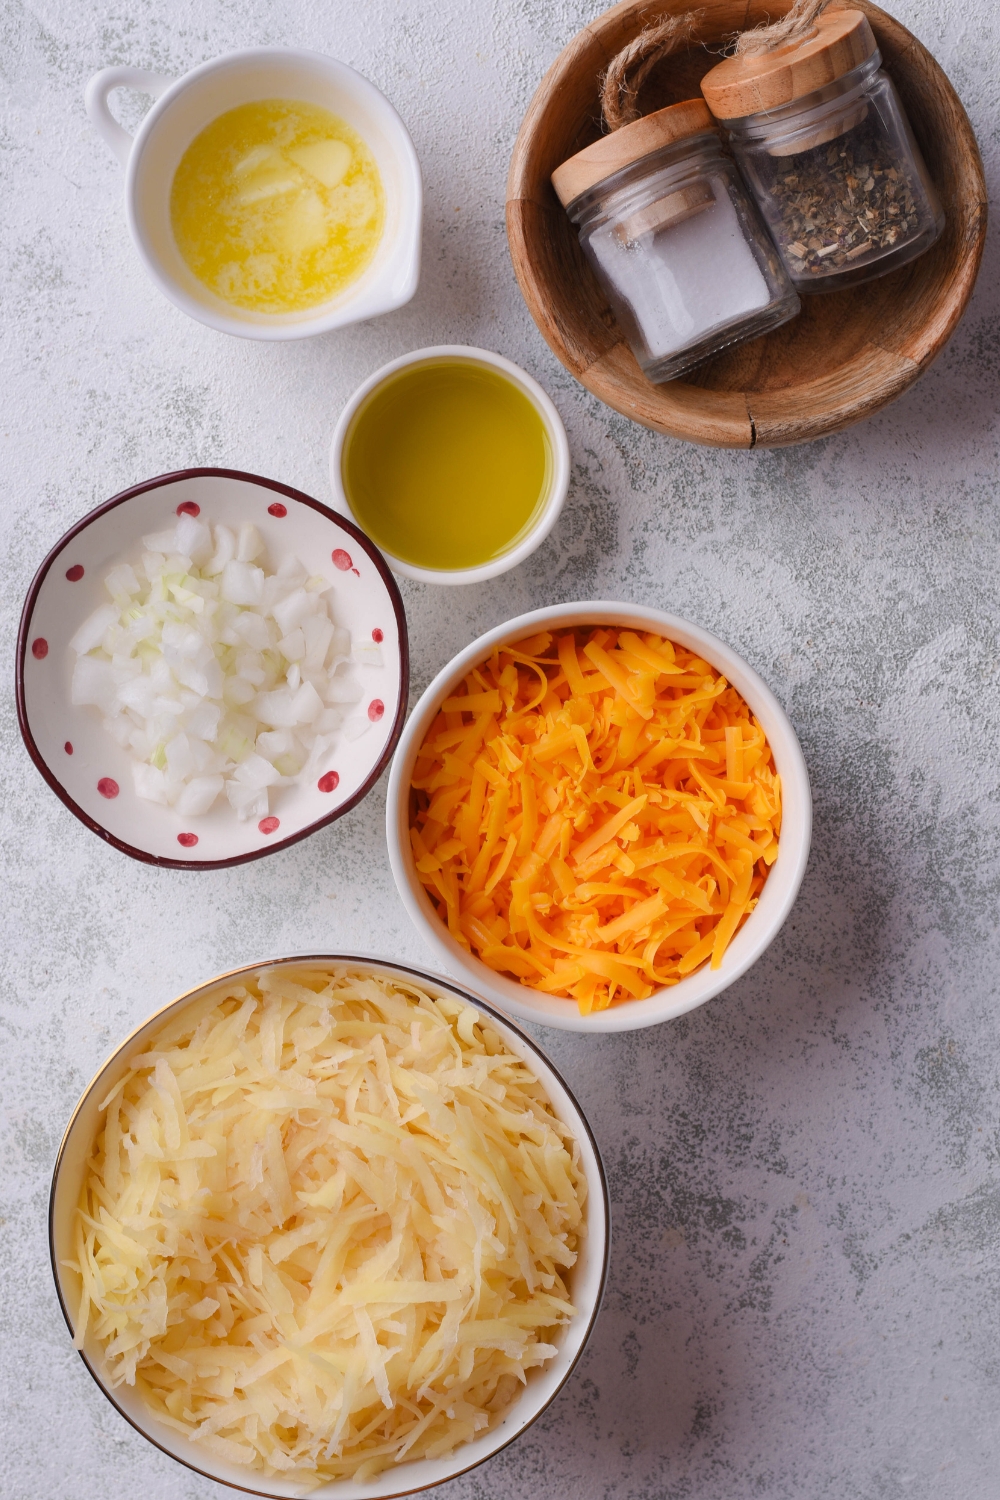 A countertop with separate bowls containing salt and pepper, melted butter, oil, diced onions, shredded carrots, and shredded cheese.